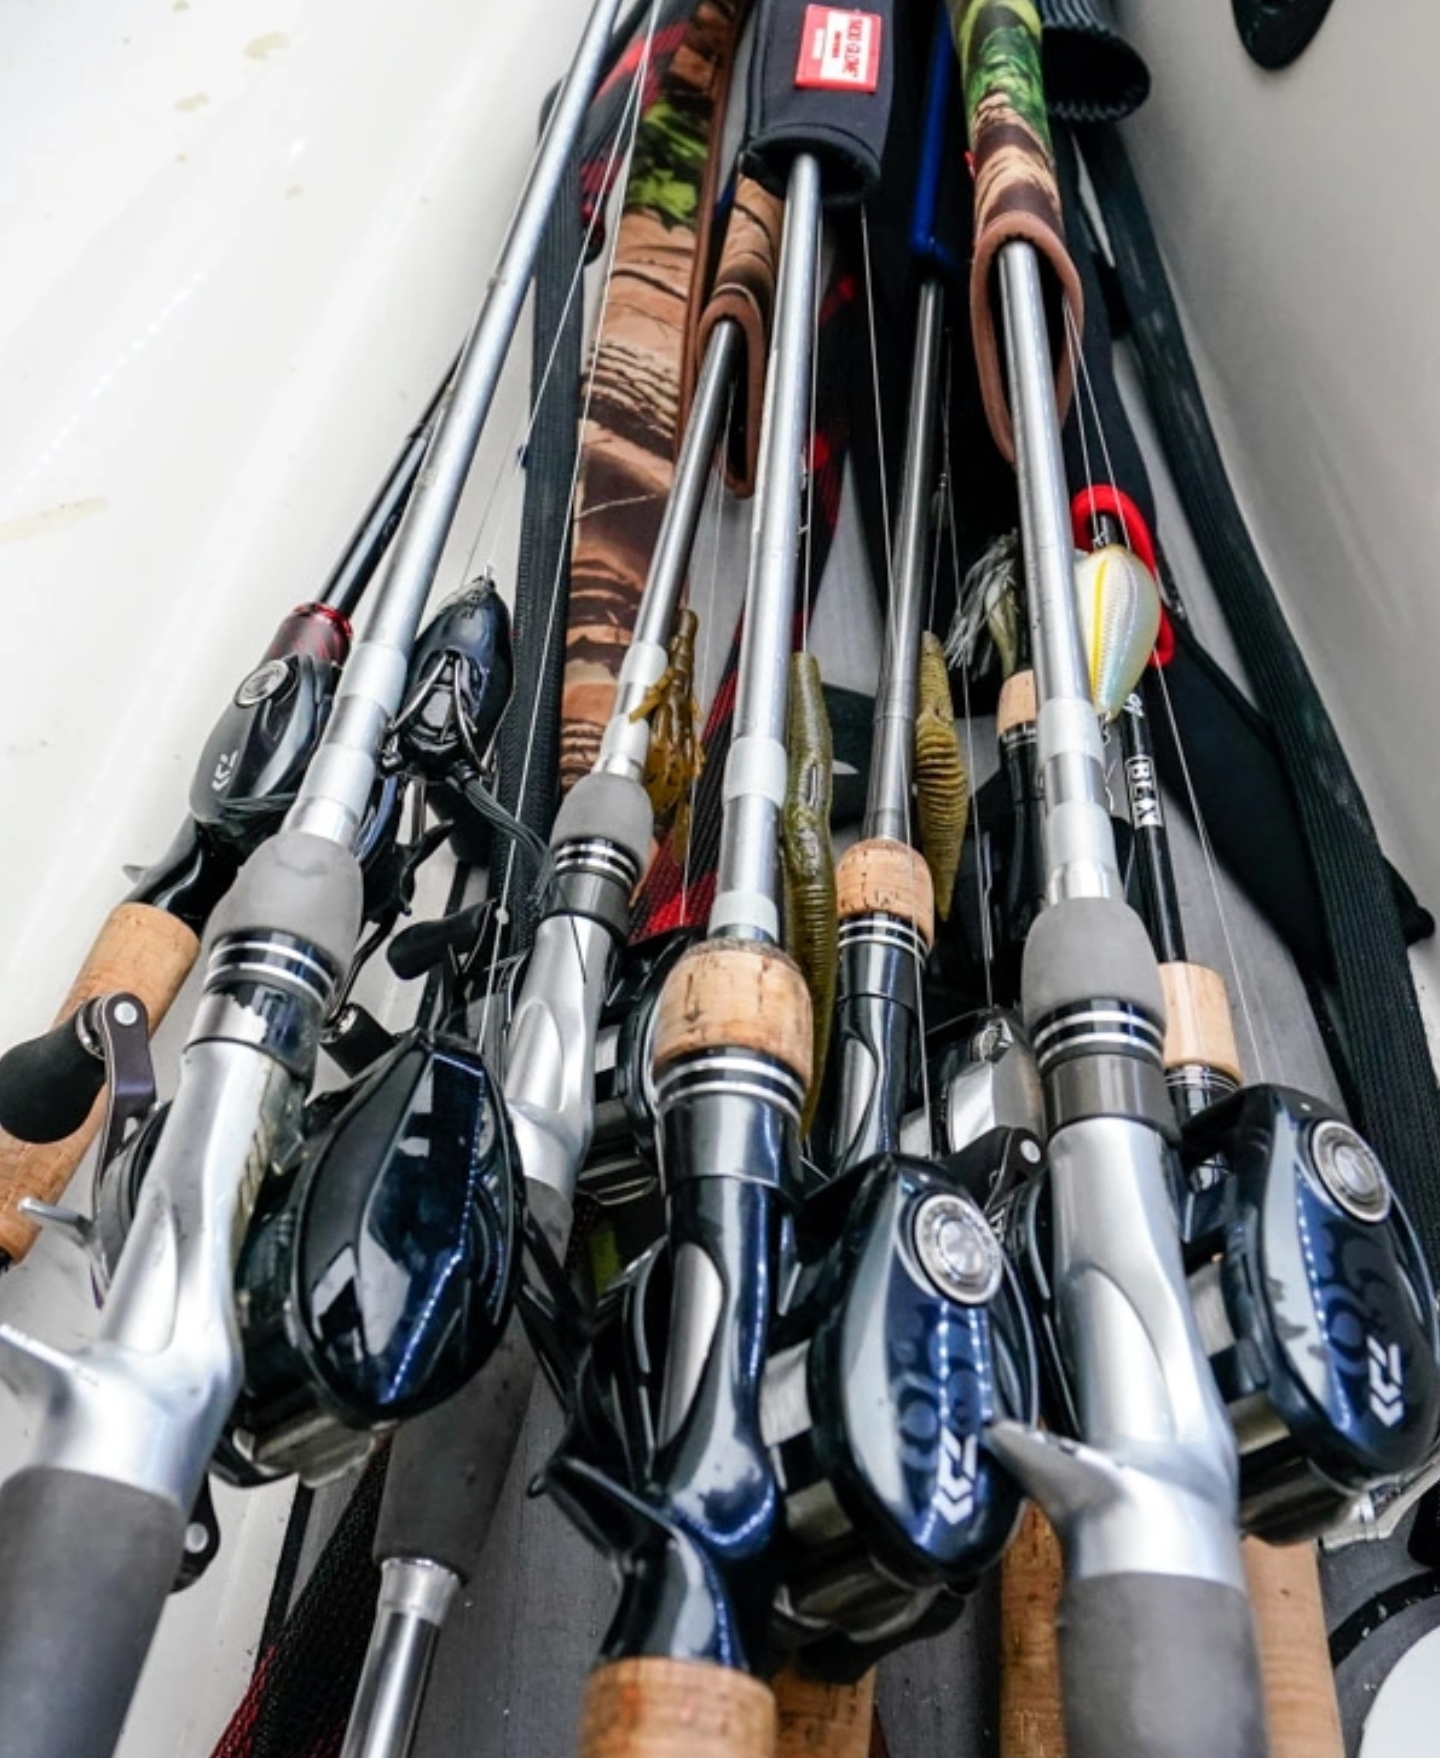 New Tatula Elite Rods - Fishing Rods, Reels, Line, and Knots